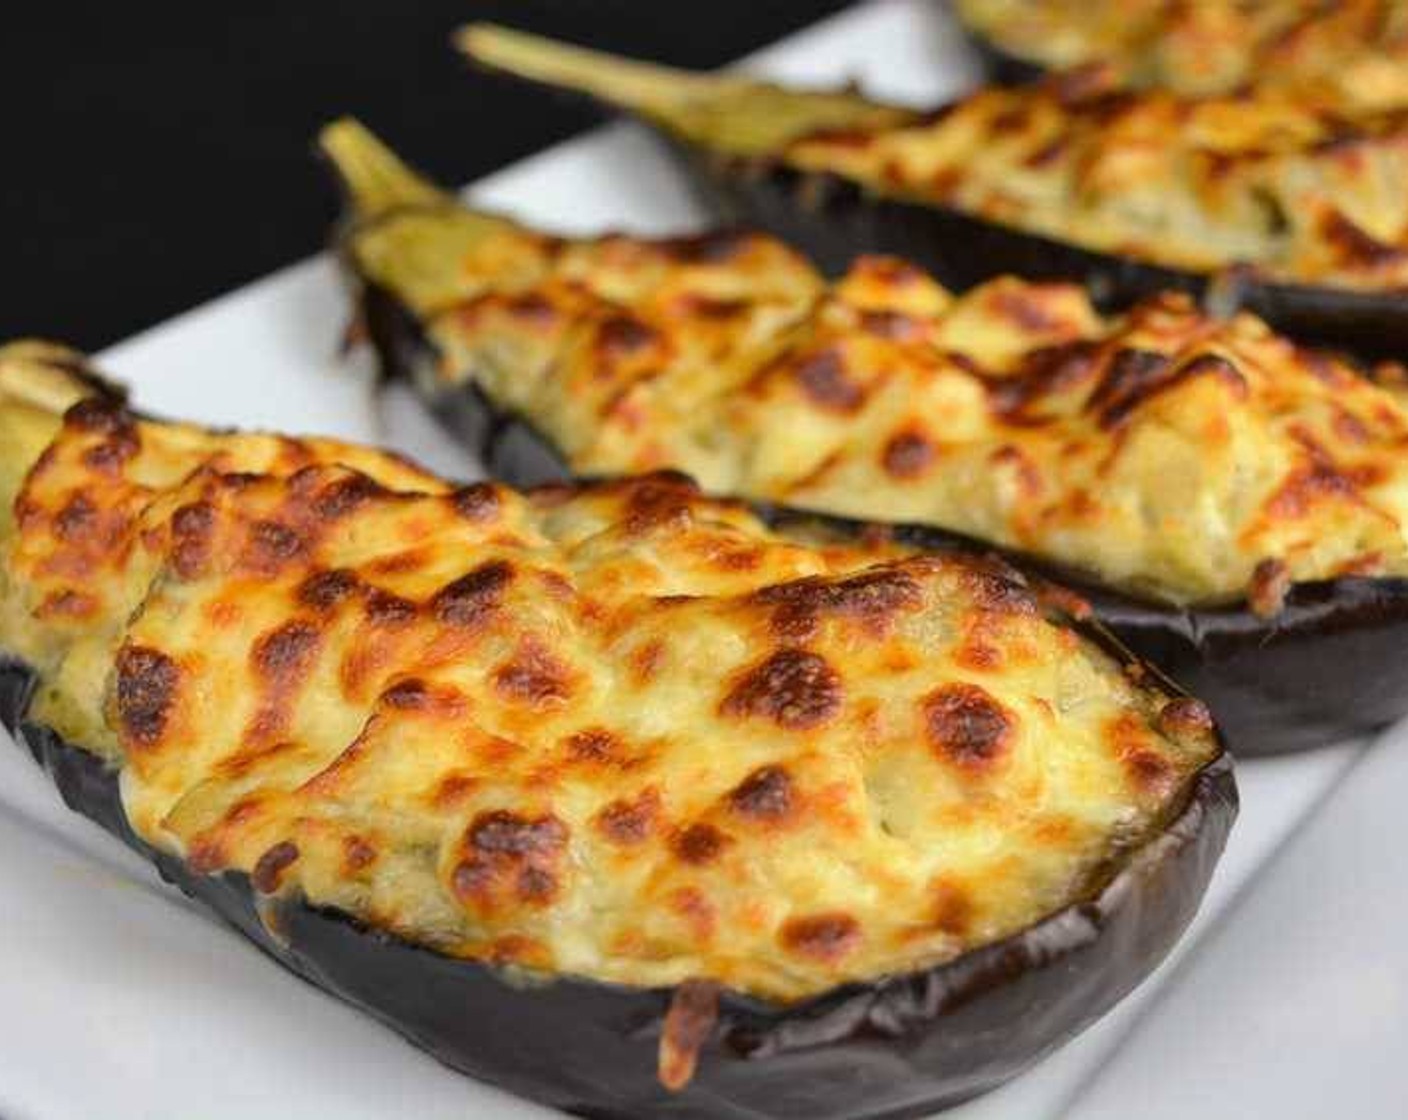 step 13 Once the shredded cheese has melted and has a golden brown color, remove the eggplants from the oven.